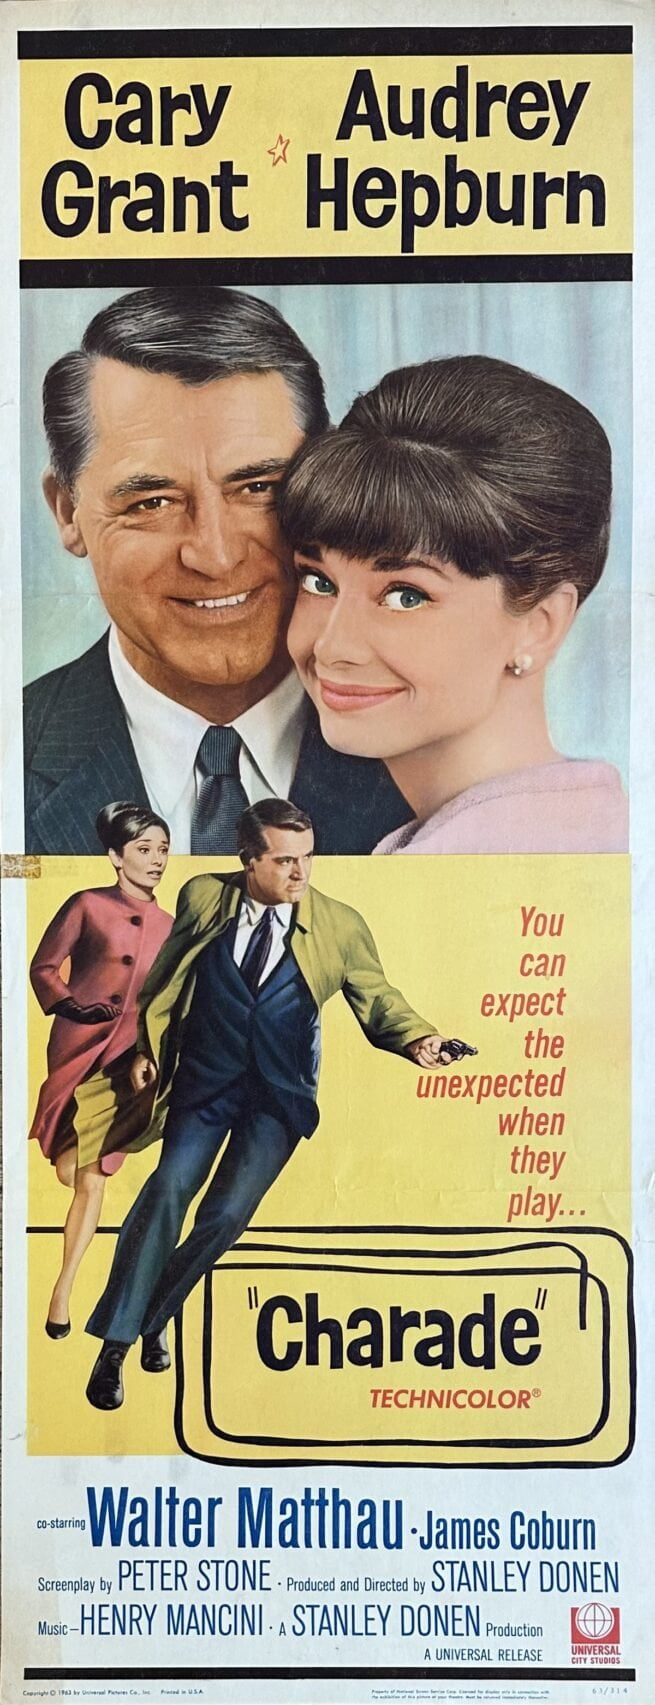 Original vintage cinema movie poster for the thriller, Charade, starring Cary Grant and Audrey Hepburn